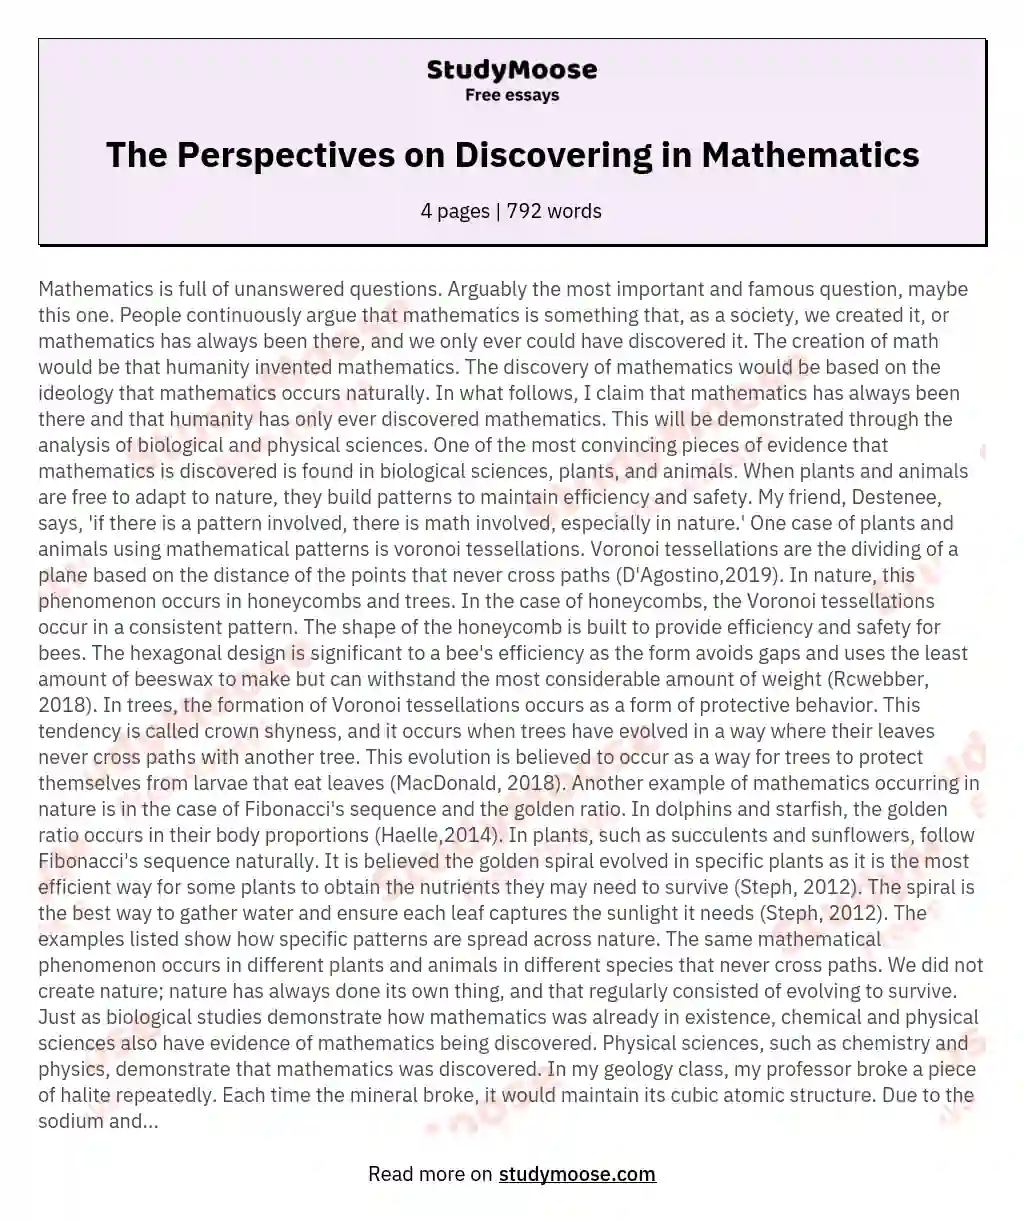 The Perspectives on Discovering in Mathematics essay